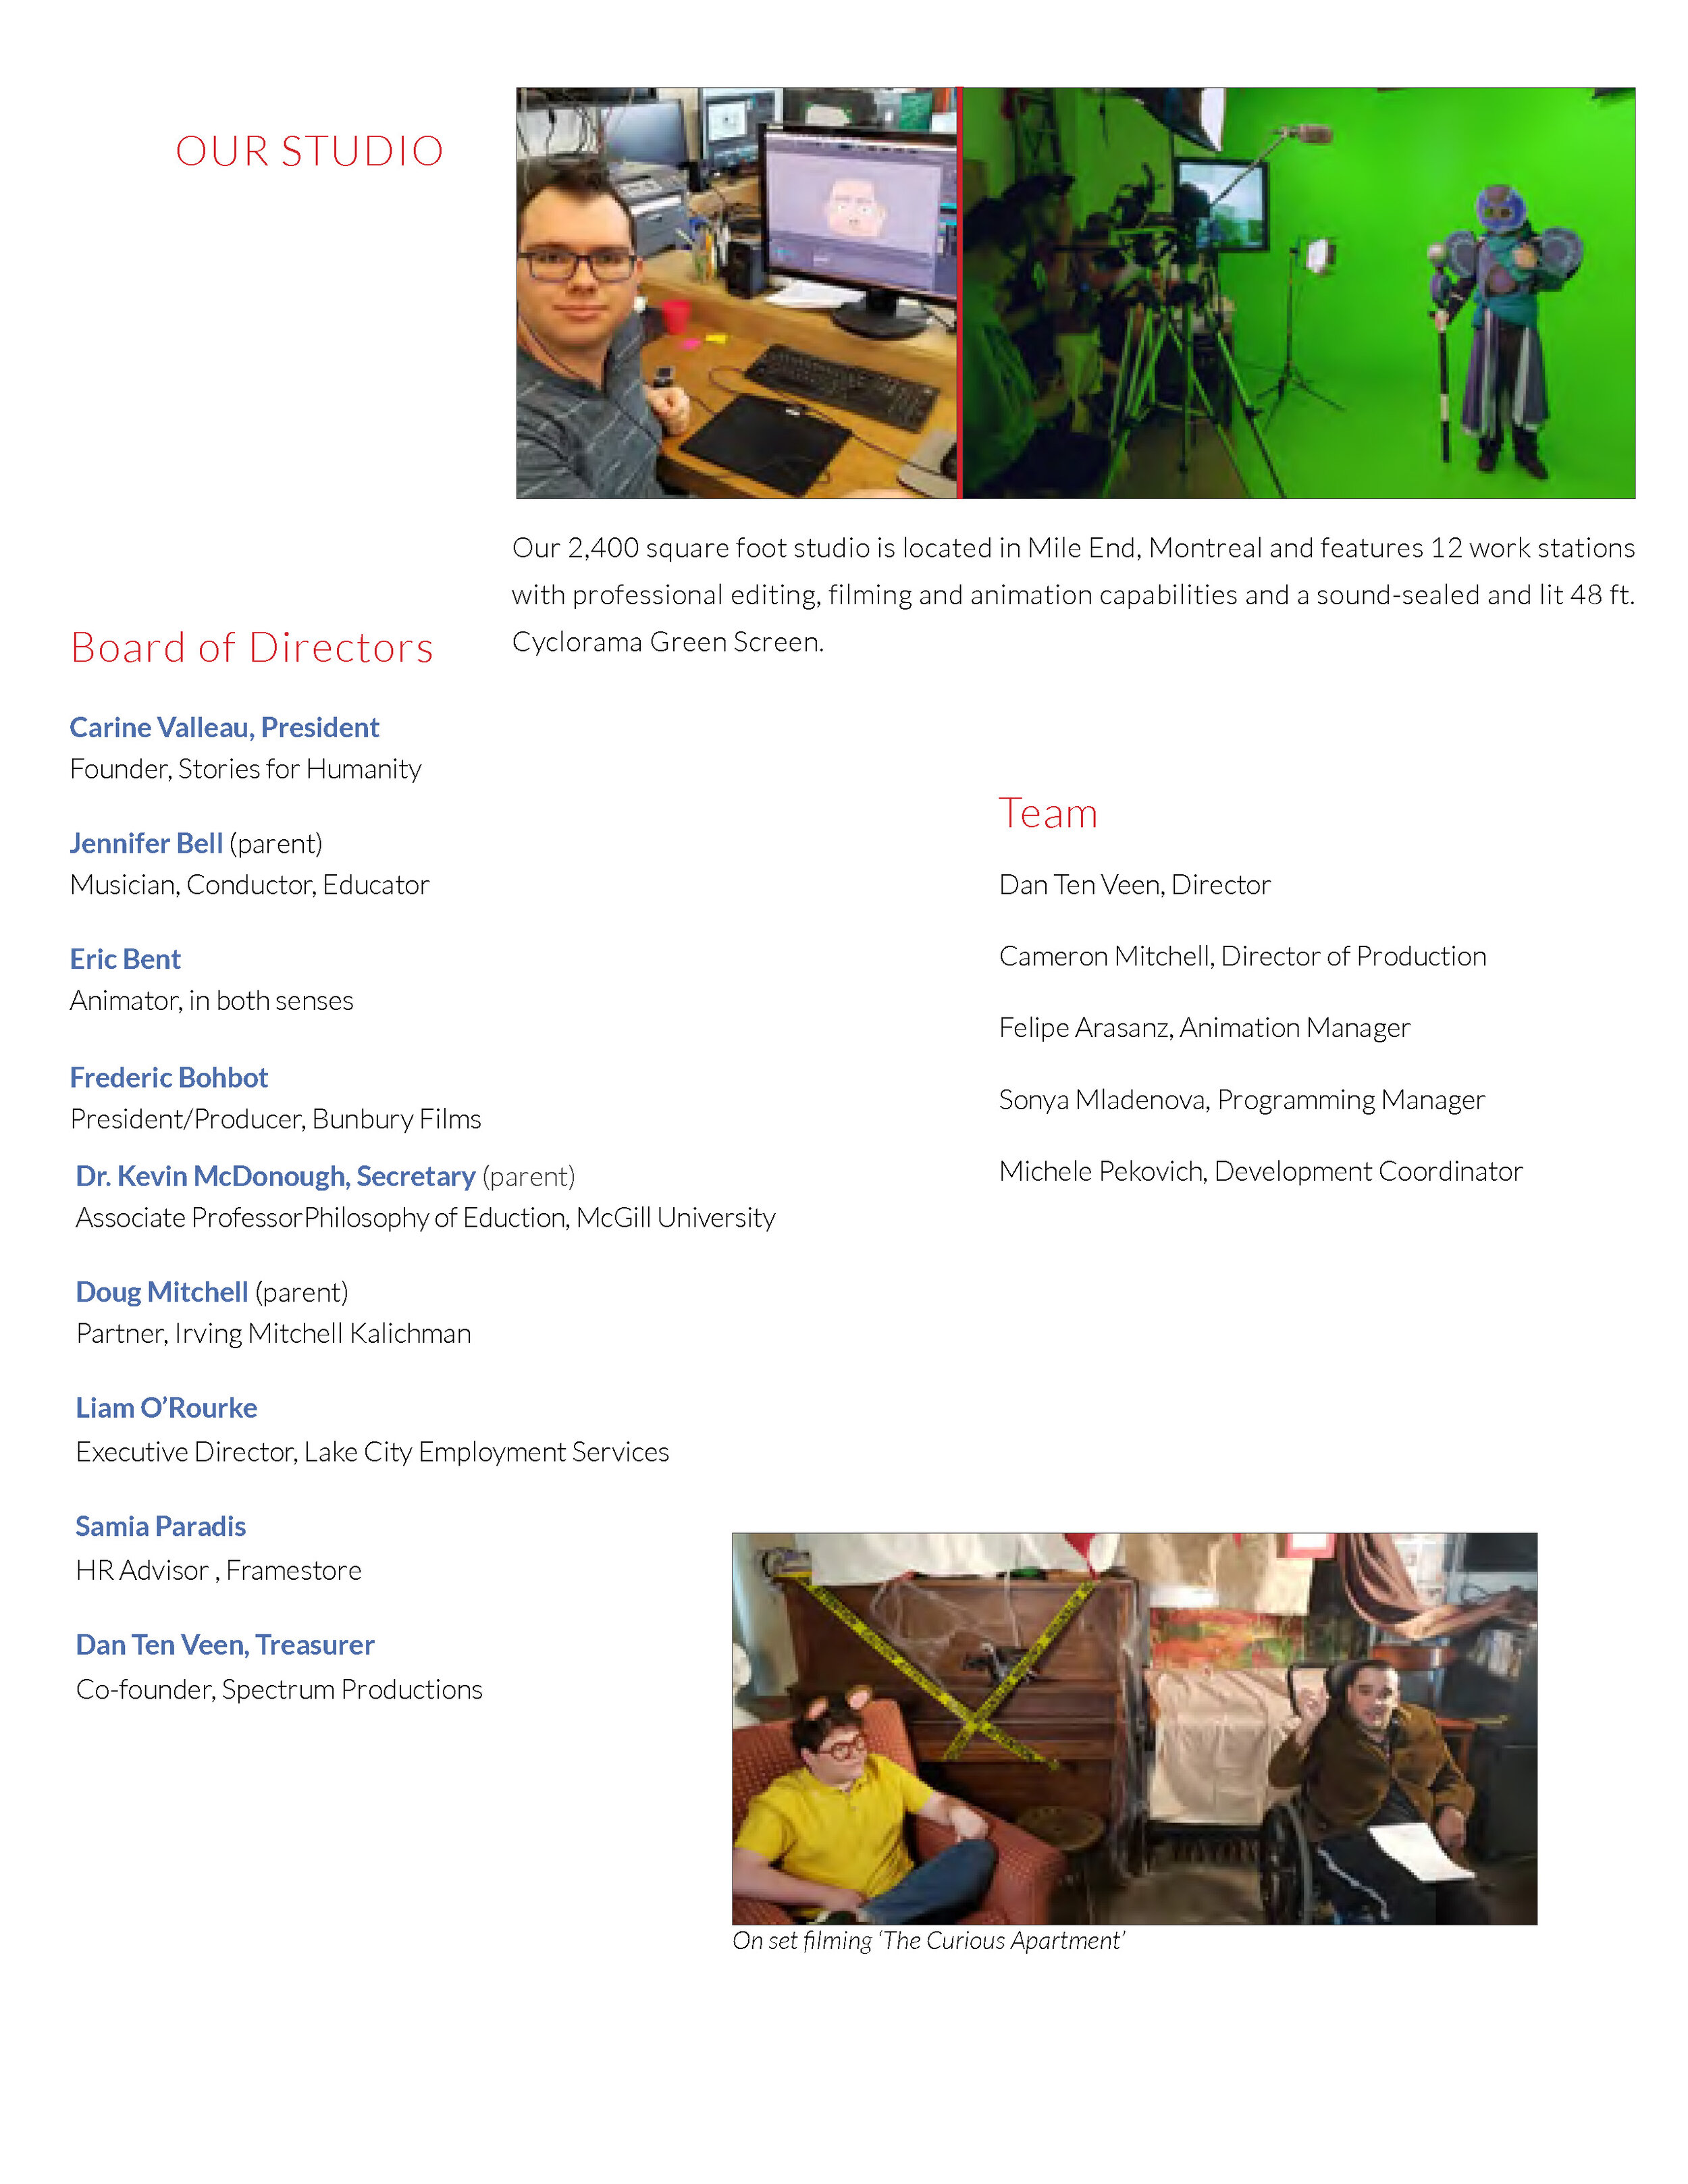 Spectrum Productions ANNUAL REPORT 2019-FinalEN_Page_10.jpg